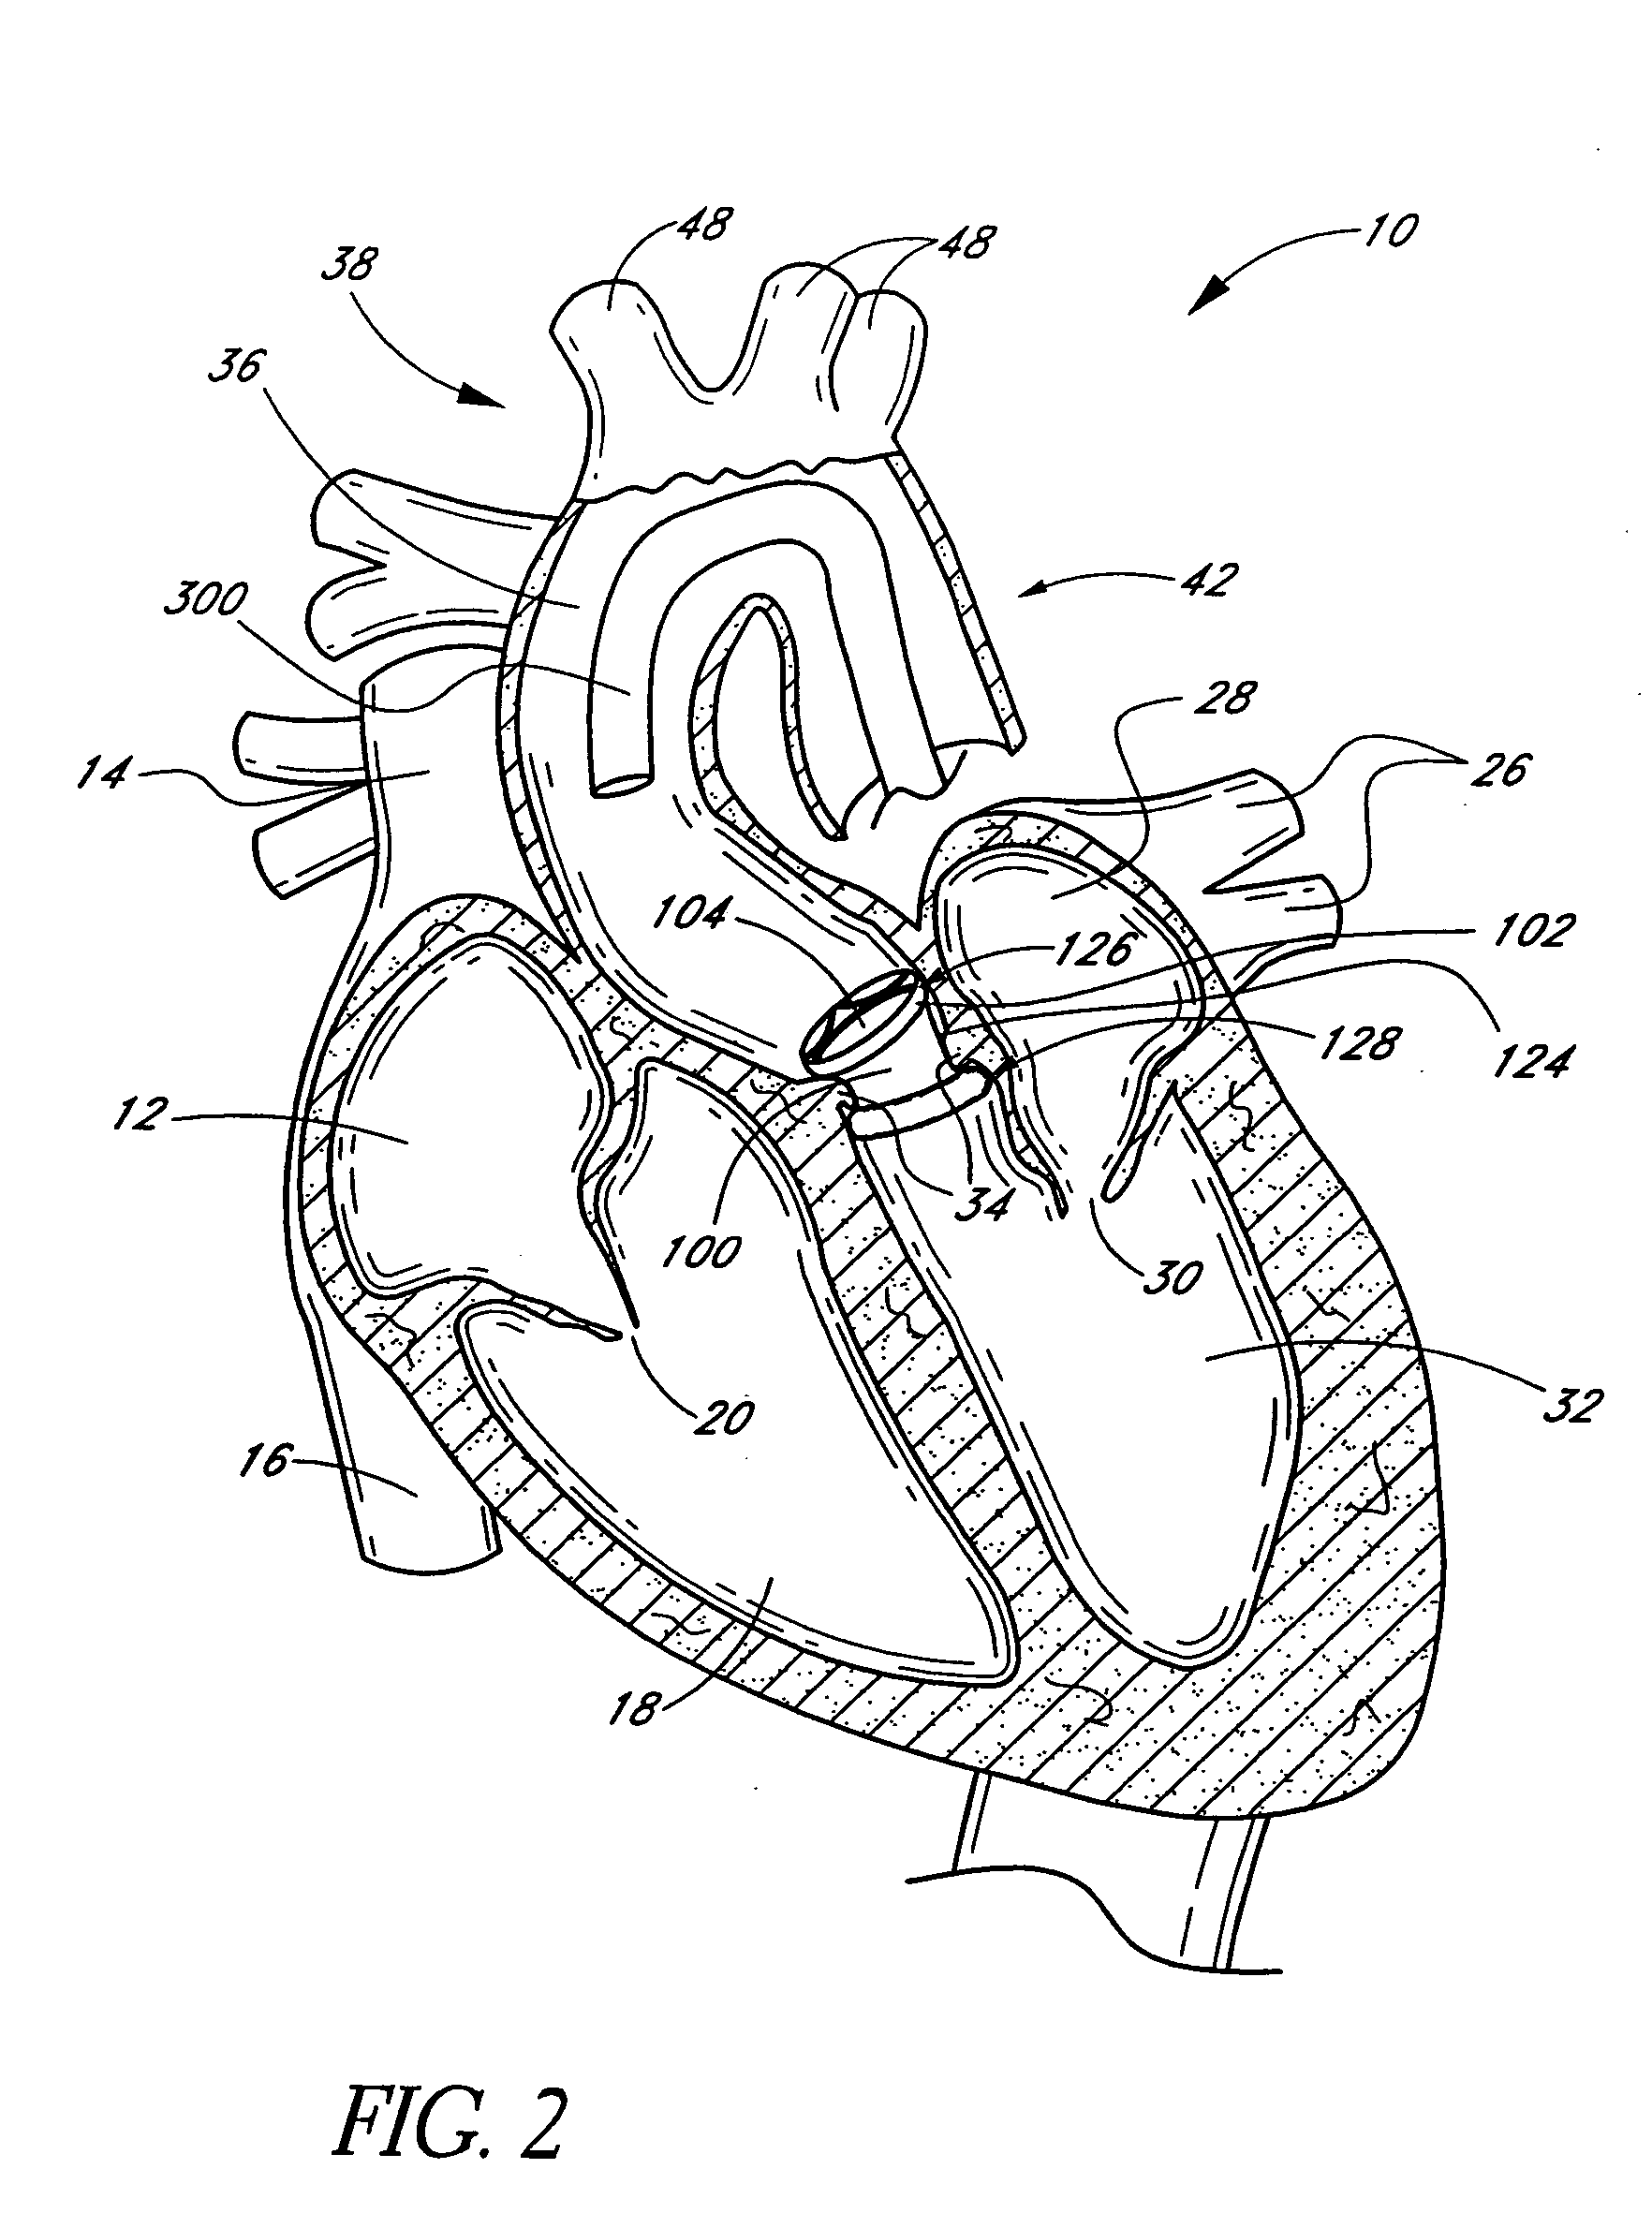 Translumenally implantable heart valve with formed in place support